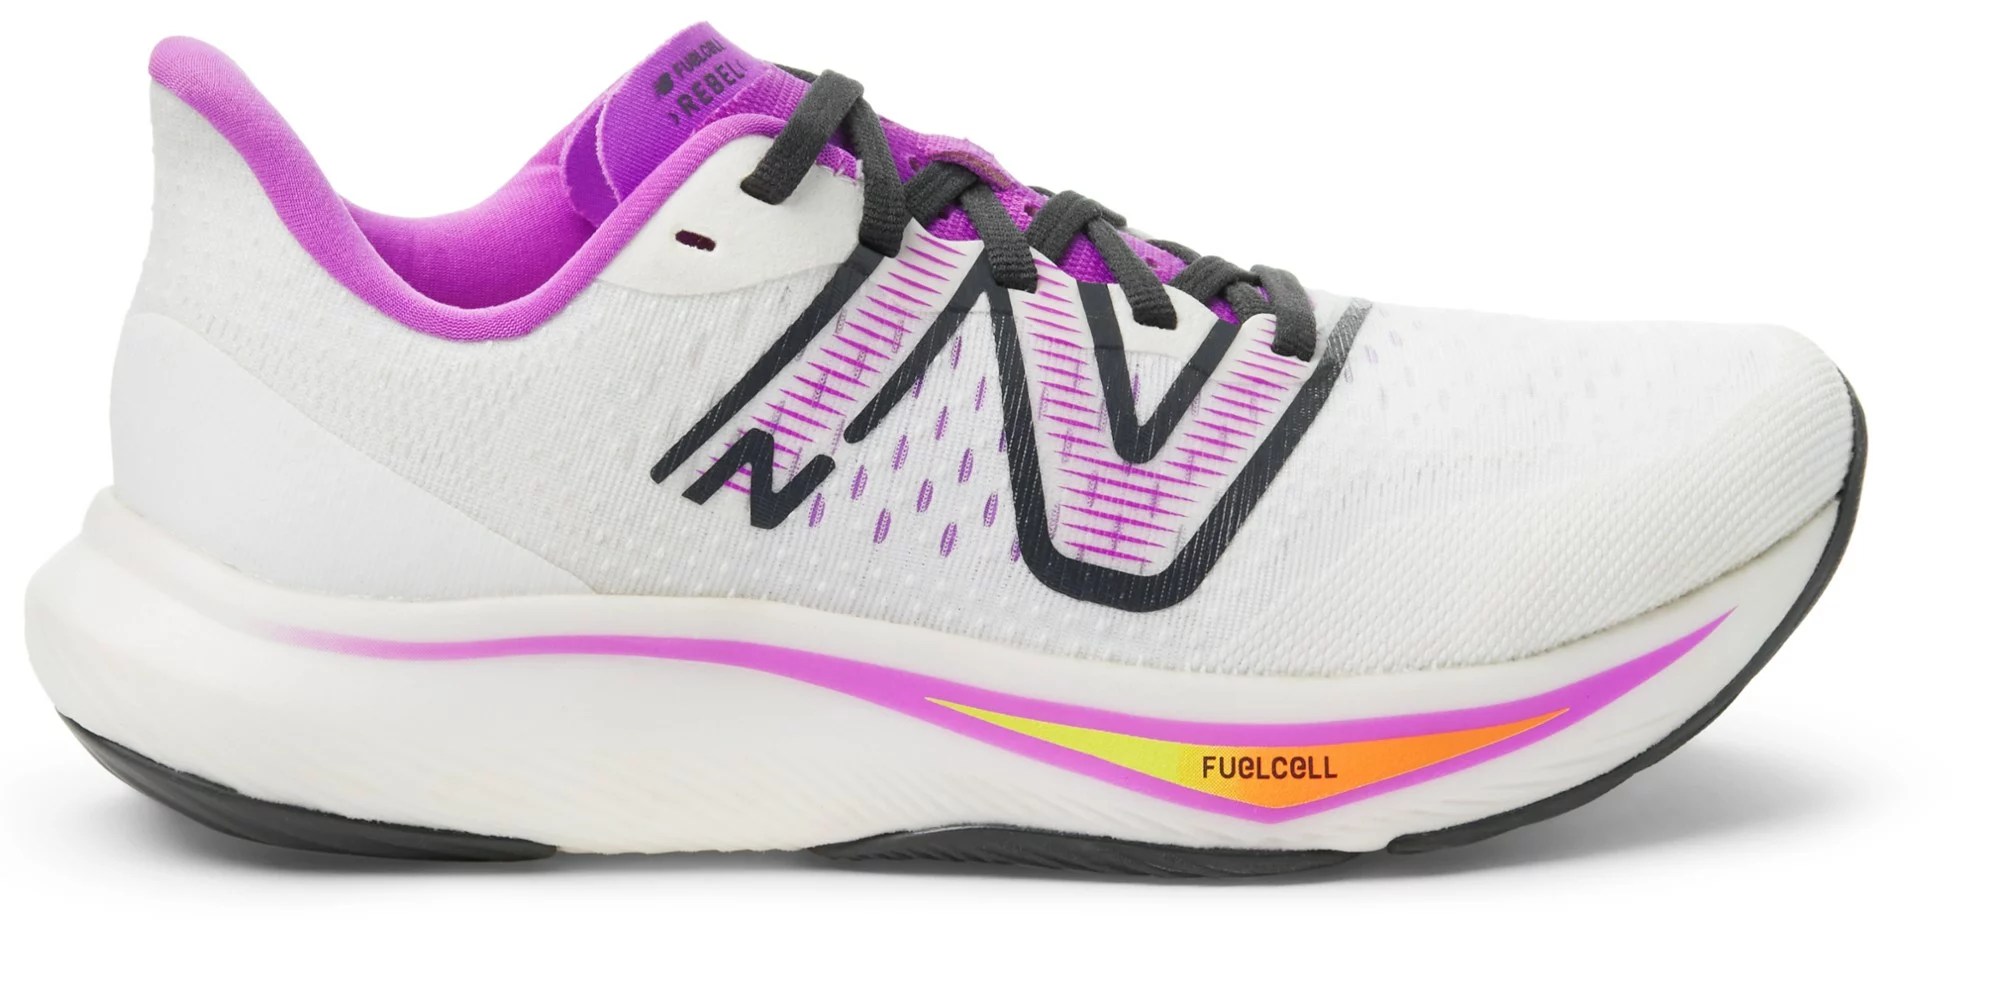 new balance fuel cell v3 road running shoes